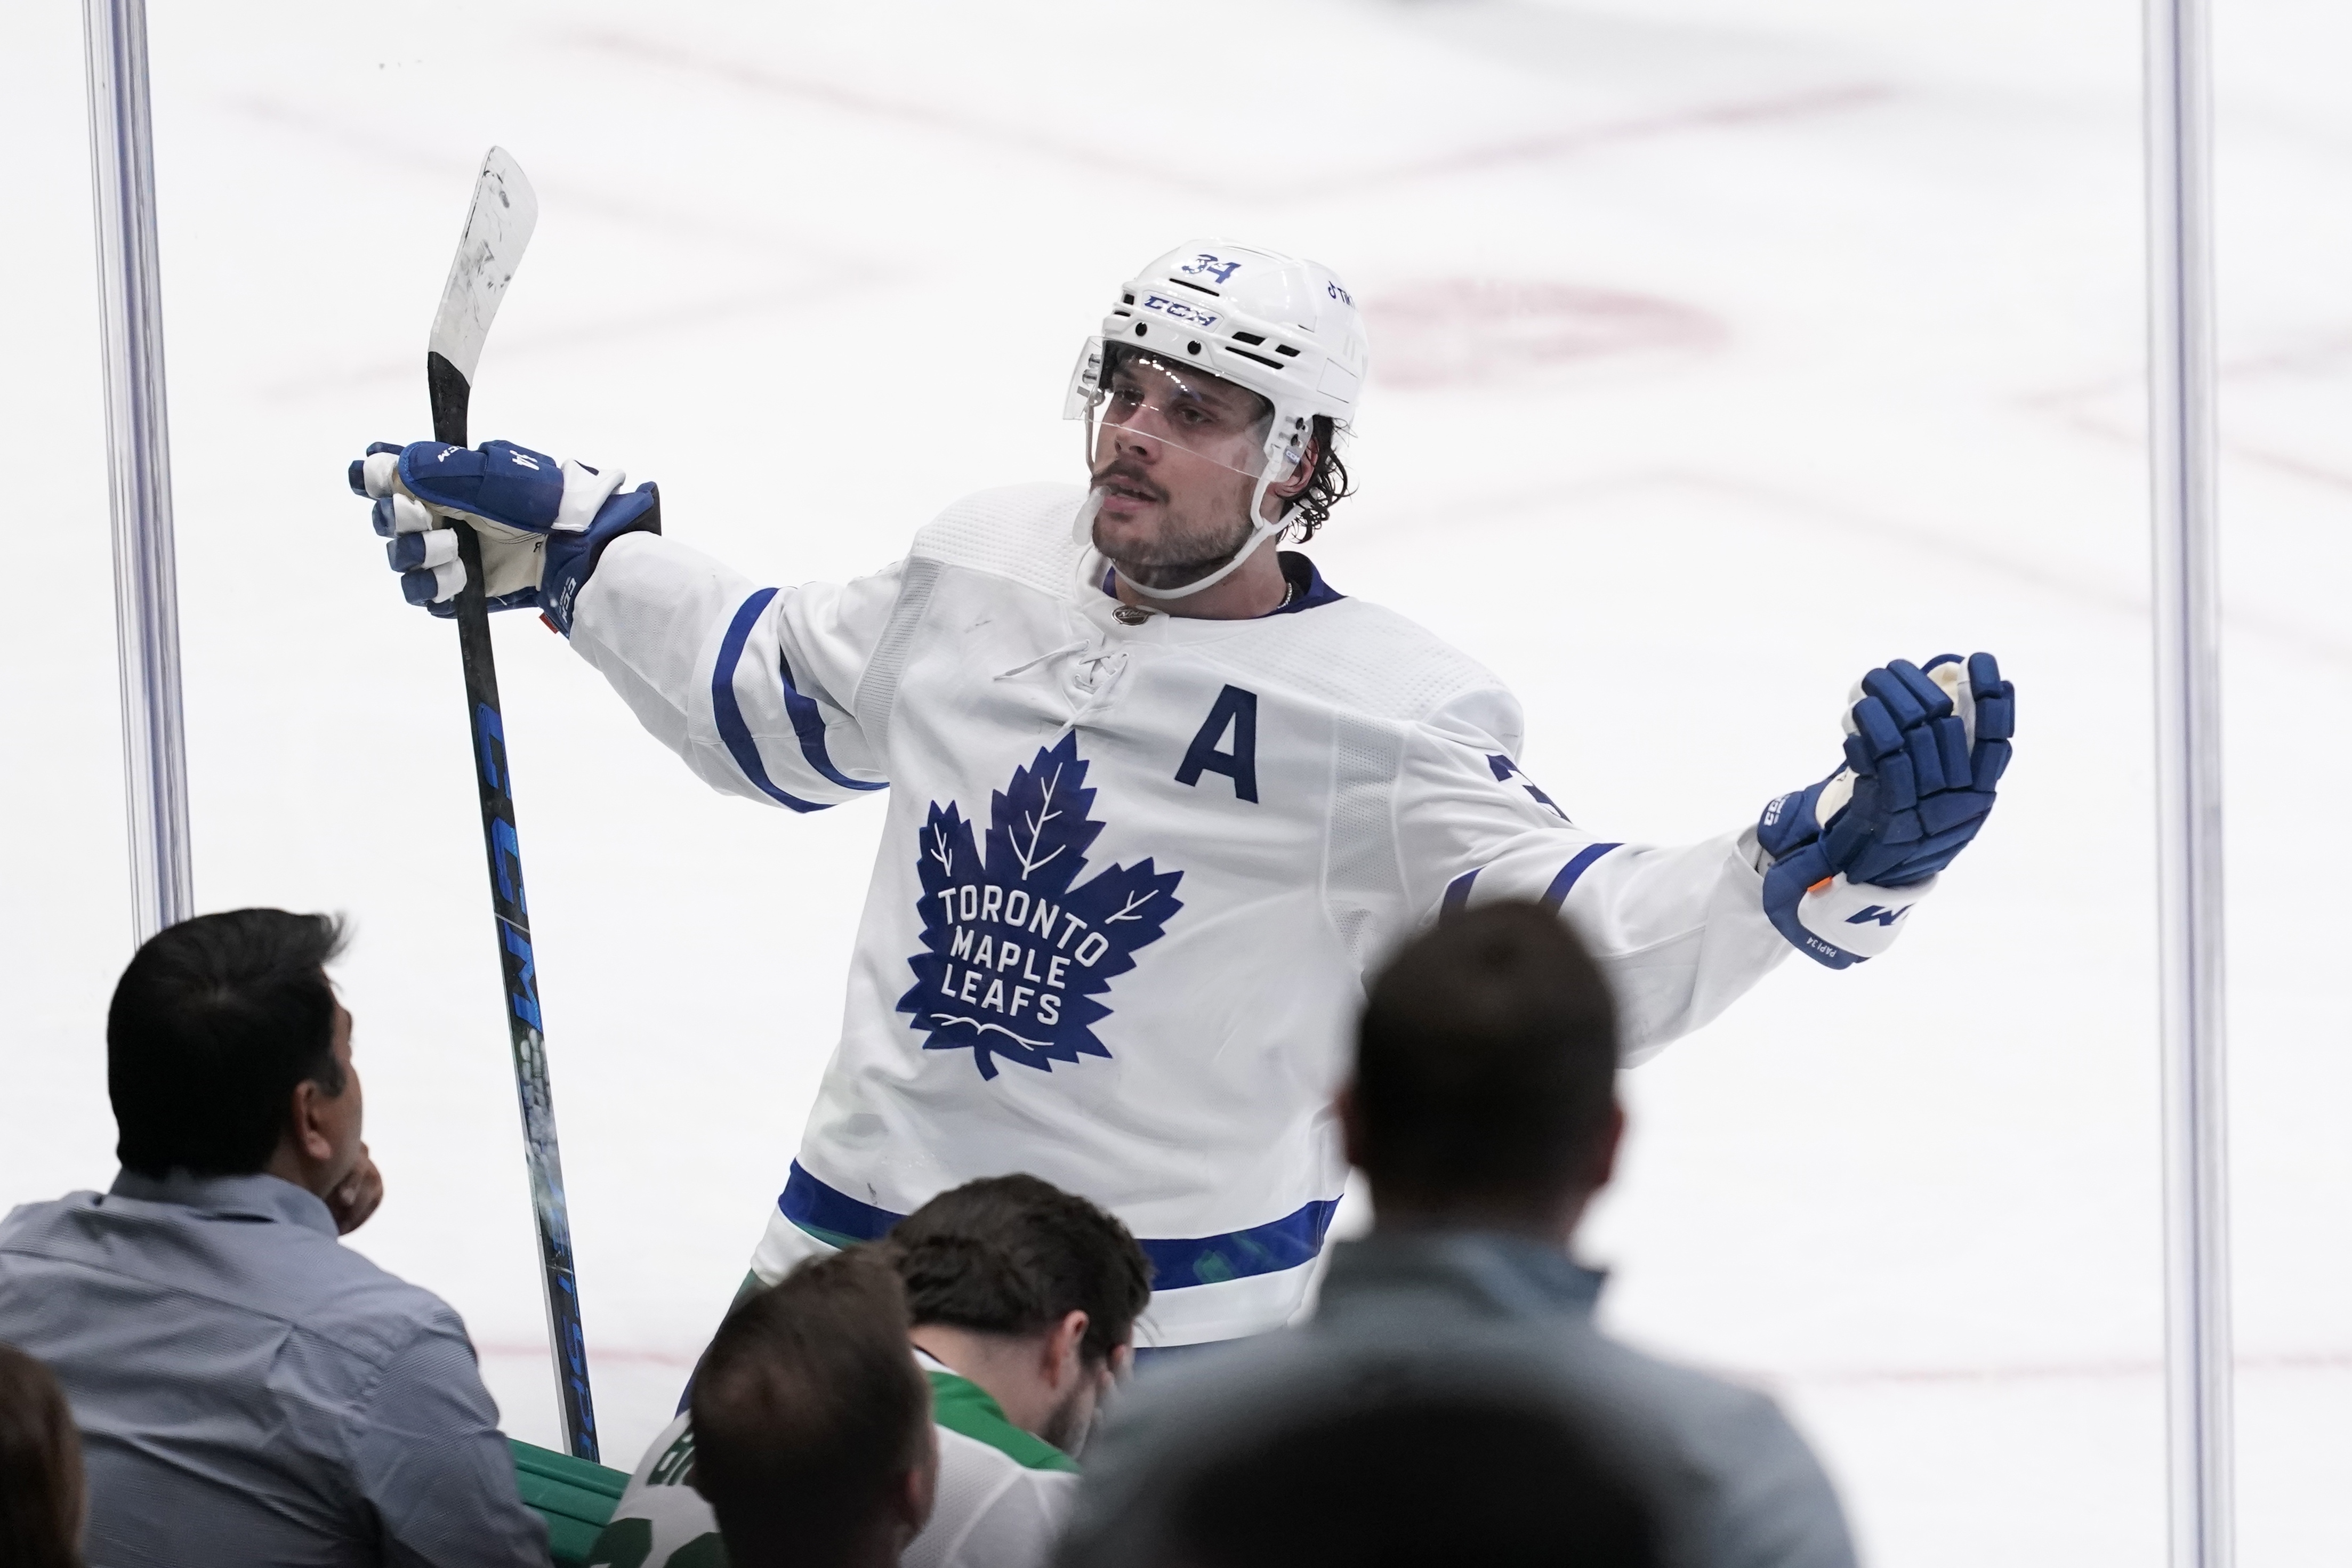 Toronto Maple Leafs out of NHL playoffs